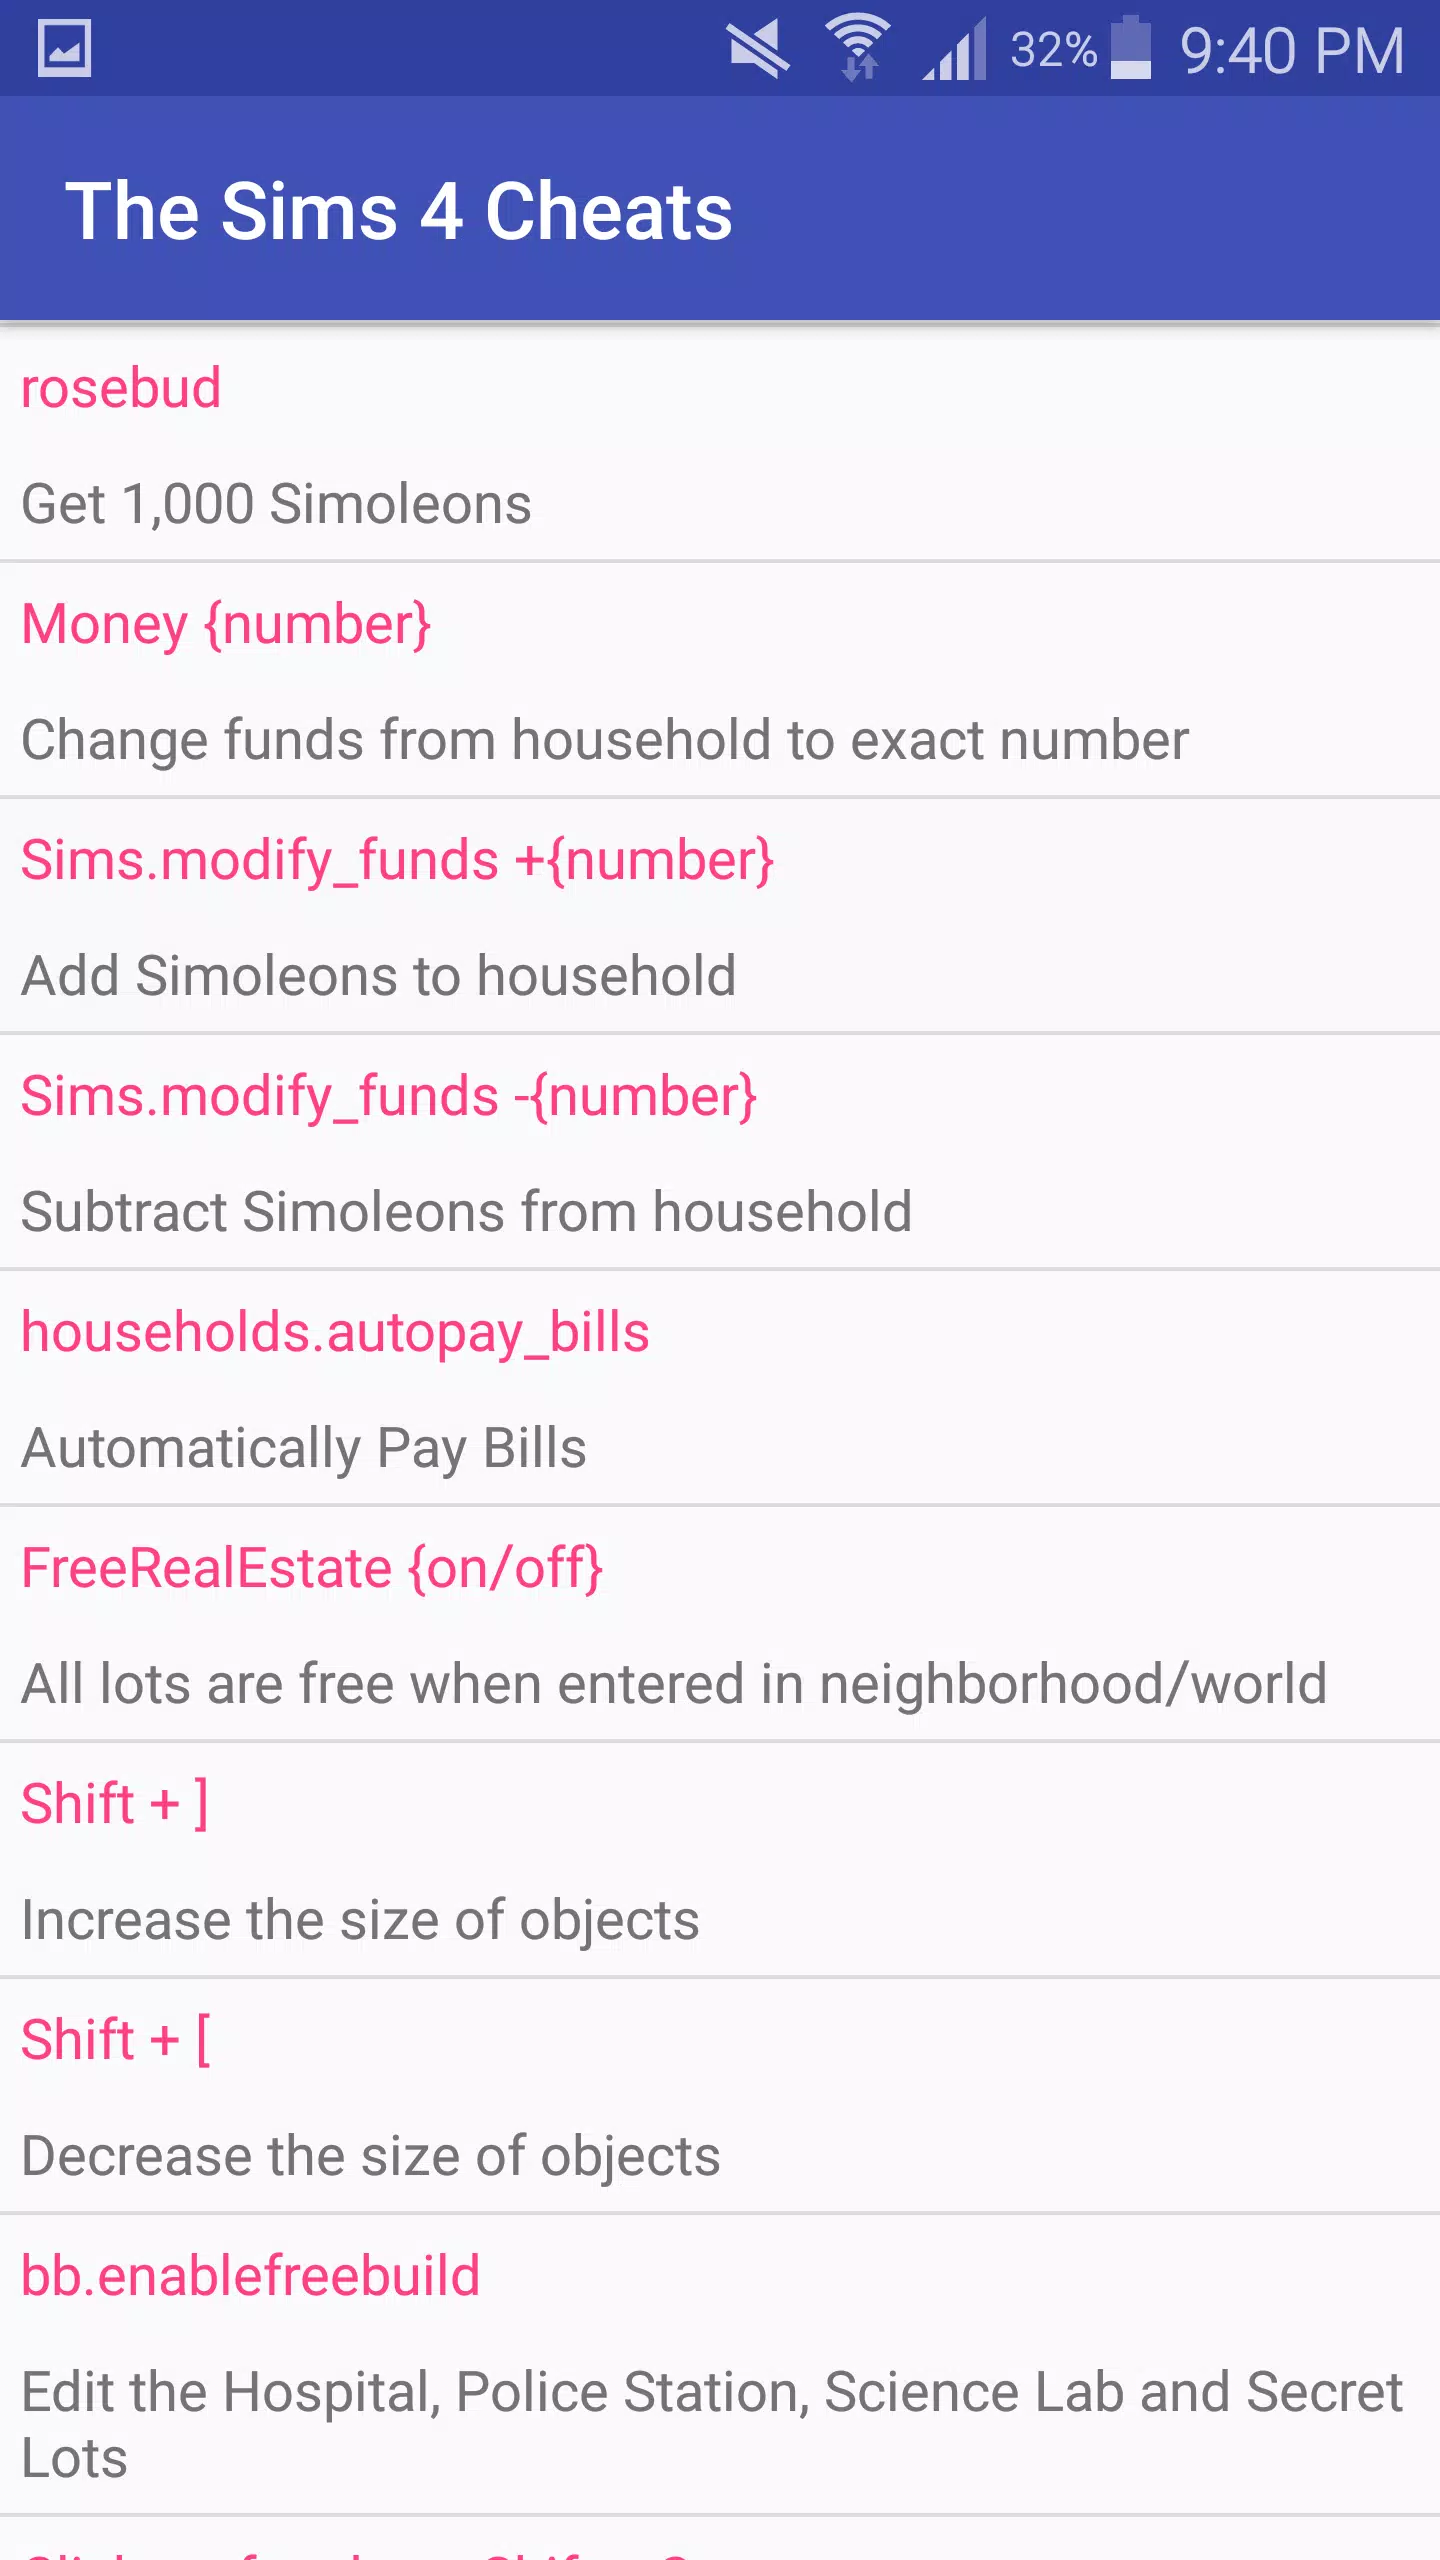 Cheat codes for Sims4 on the PS4 ❗️❗️#fyp #sims4 #cheats, Sims 4